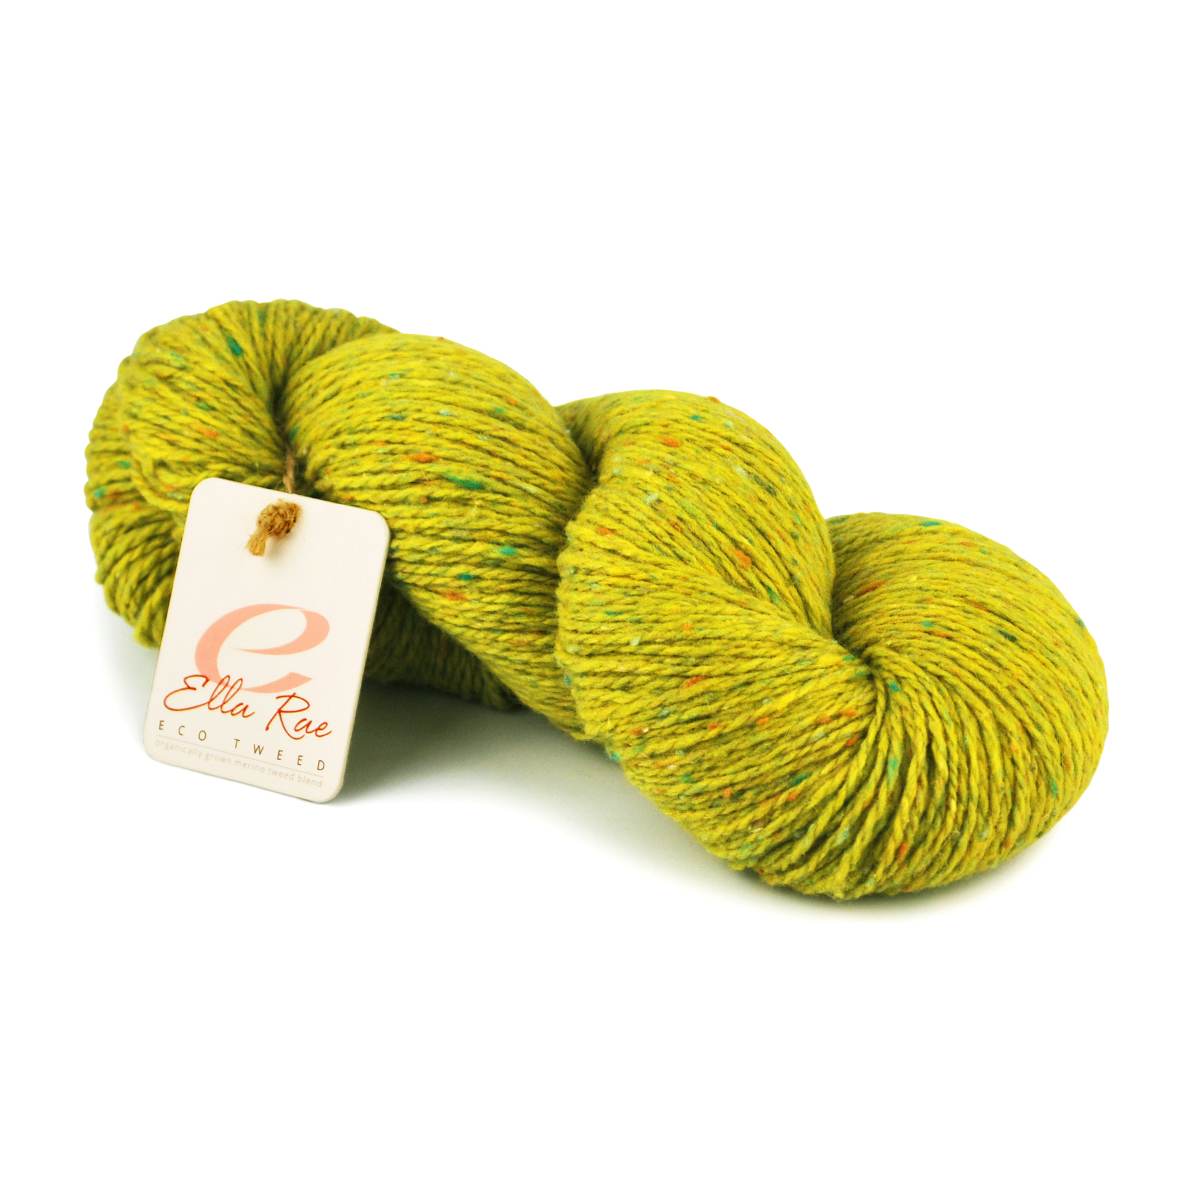 Organic Yarn | Ella Rae Eco Tweed is a blend of Merino wool with polyamide and creates a soft yet strong fiber. This 100% organic yarn is great for knit patterns or crochet patterns: sweaters, scarves, cowls, wraps, and more. 